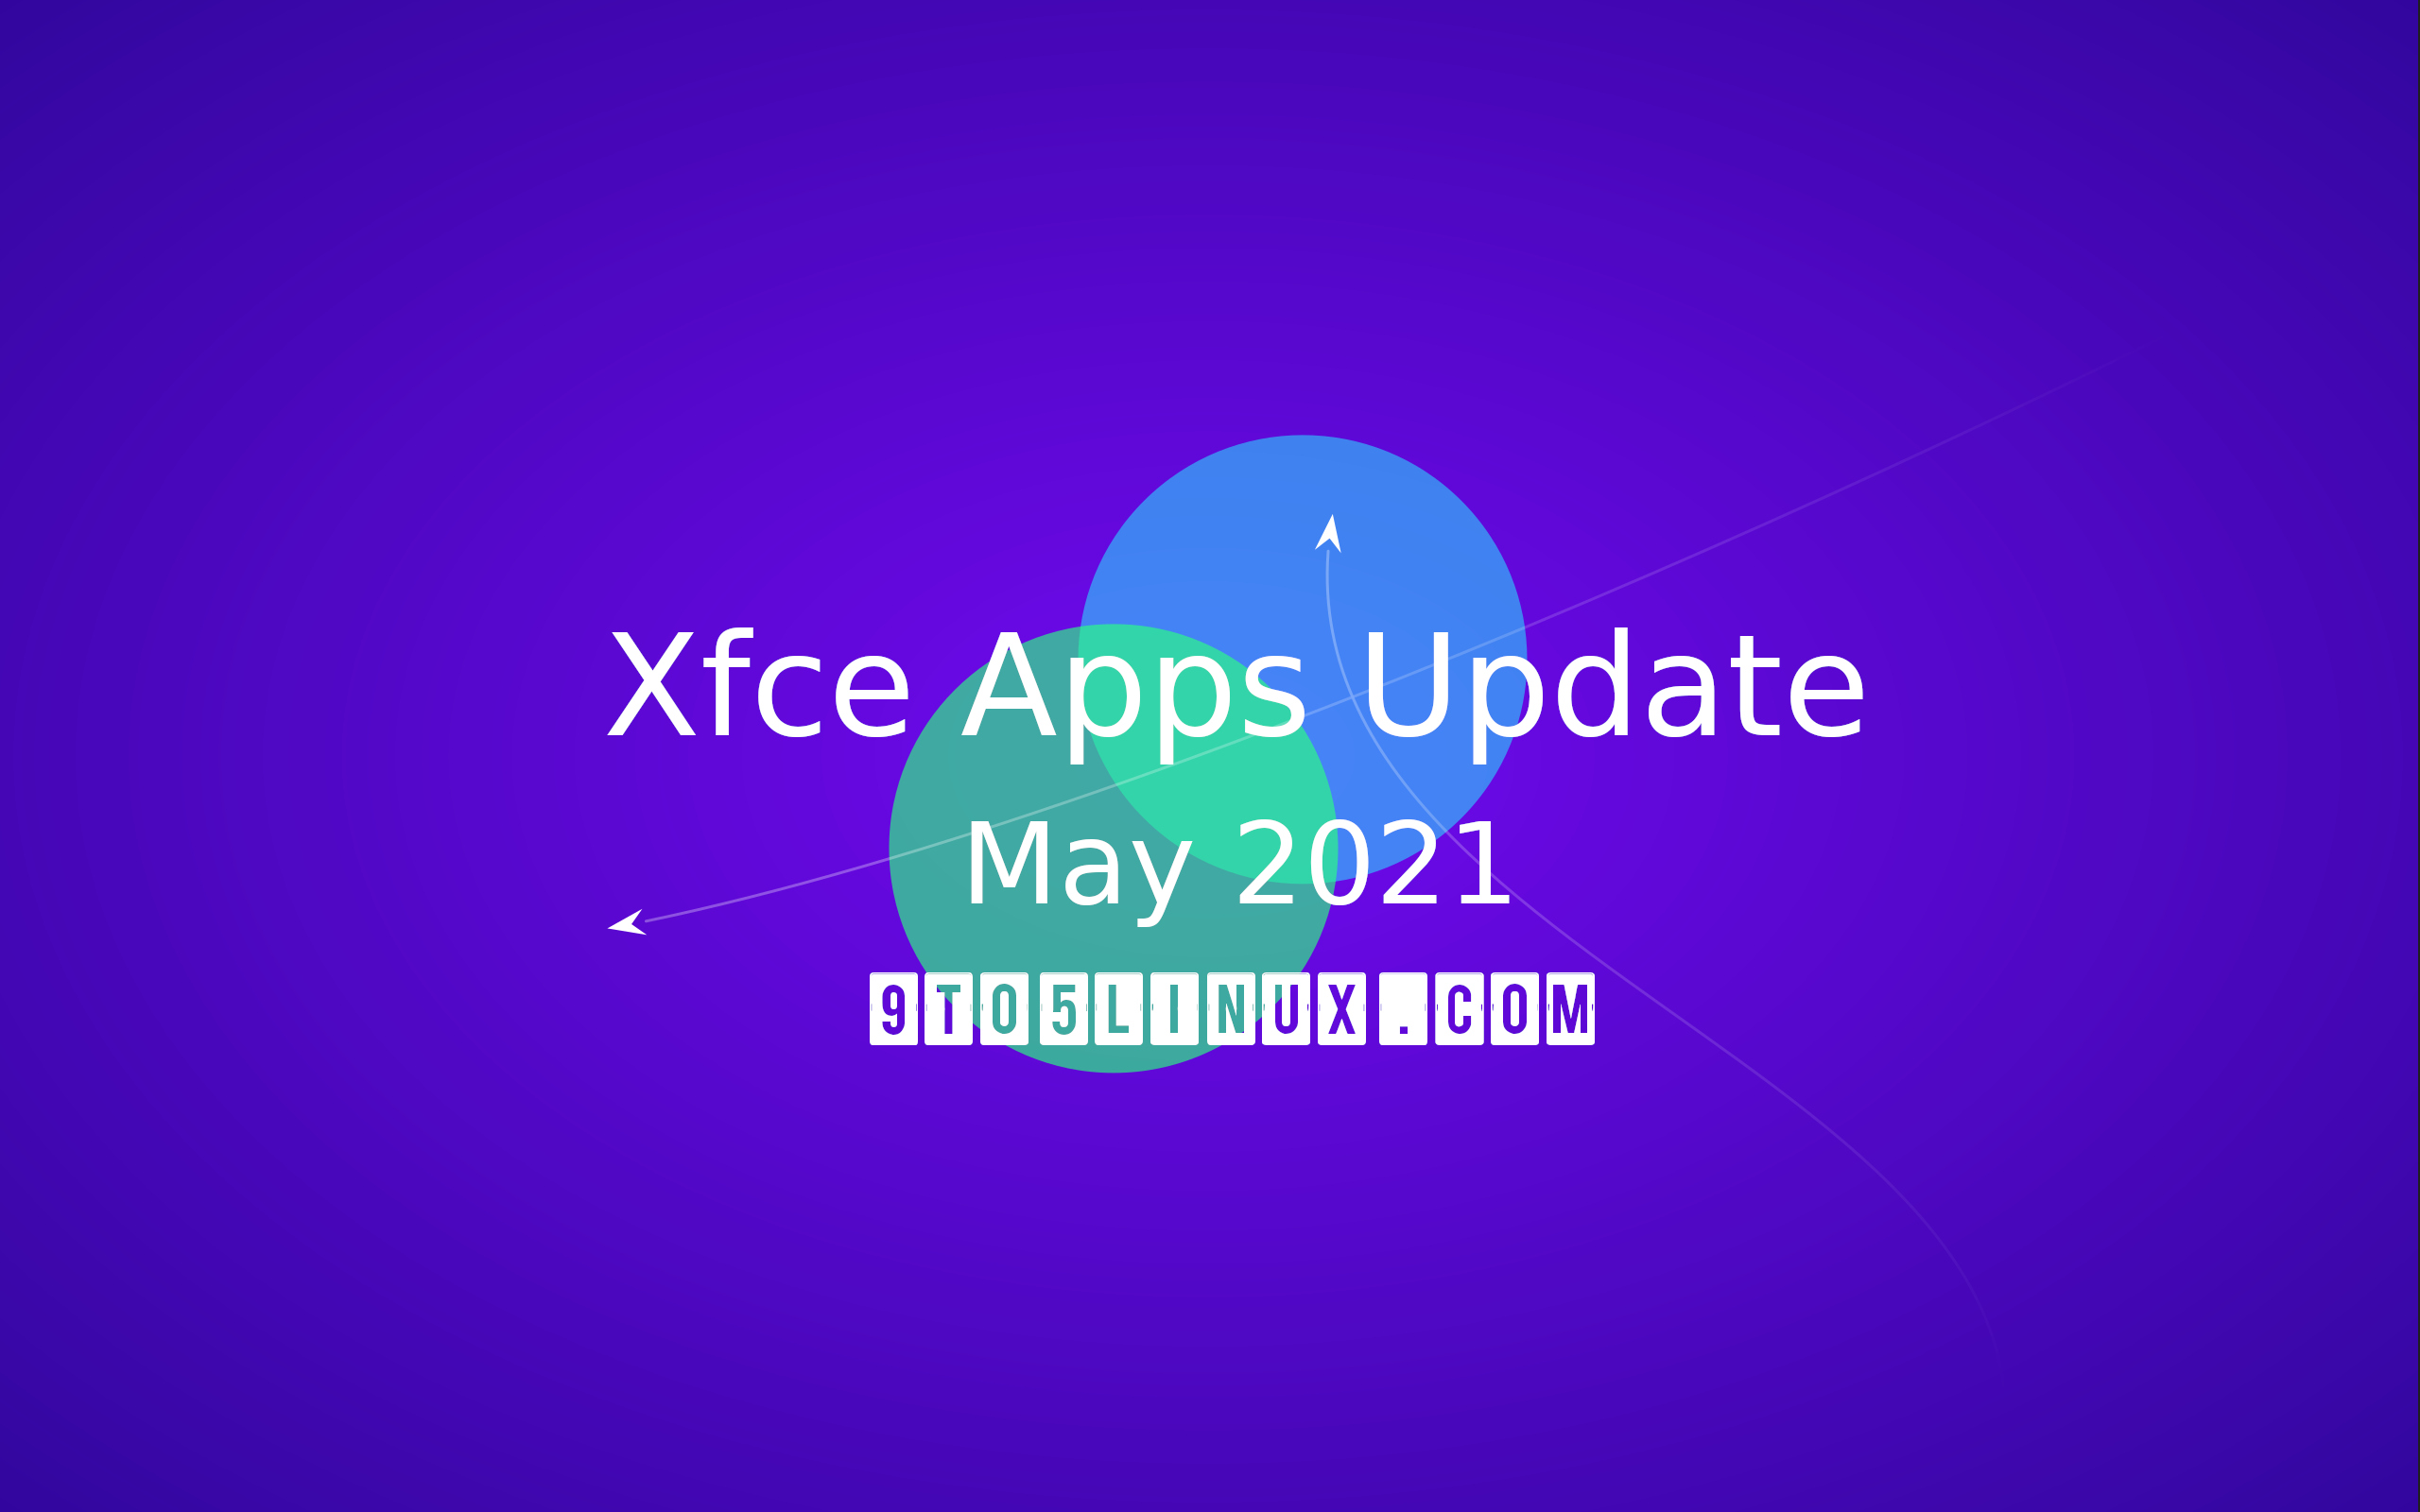 Xfce’s Apps Update for May 2021 Brings Improvements to Thunar, Mousepad, and More